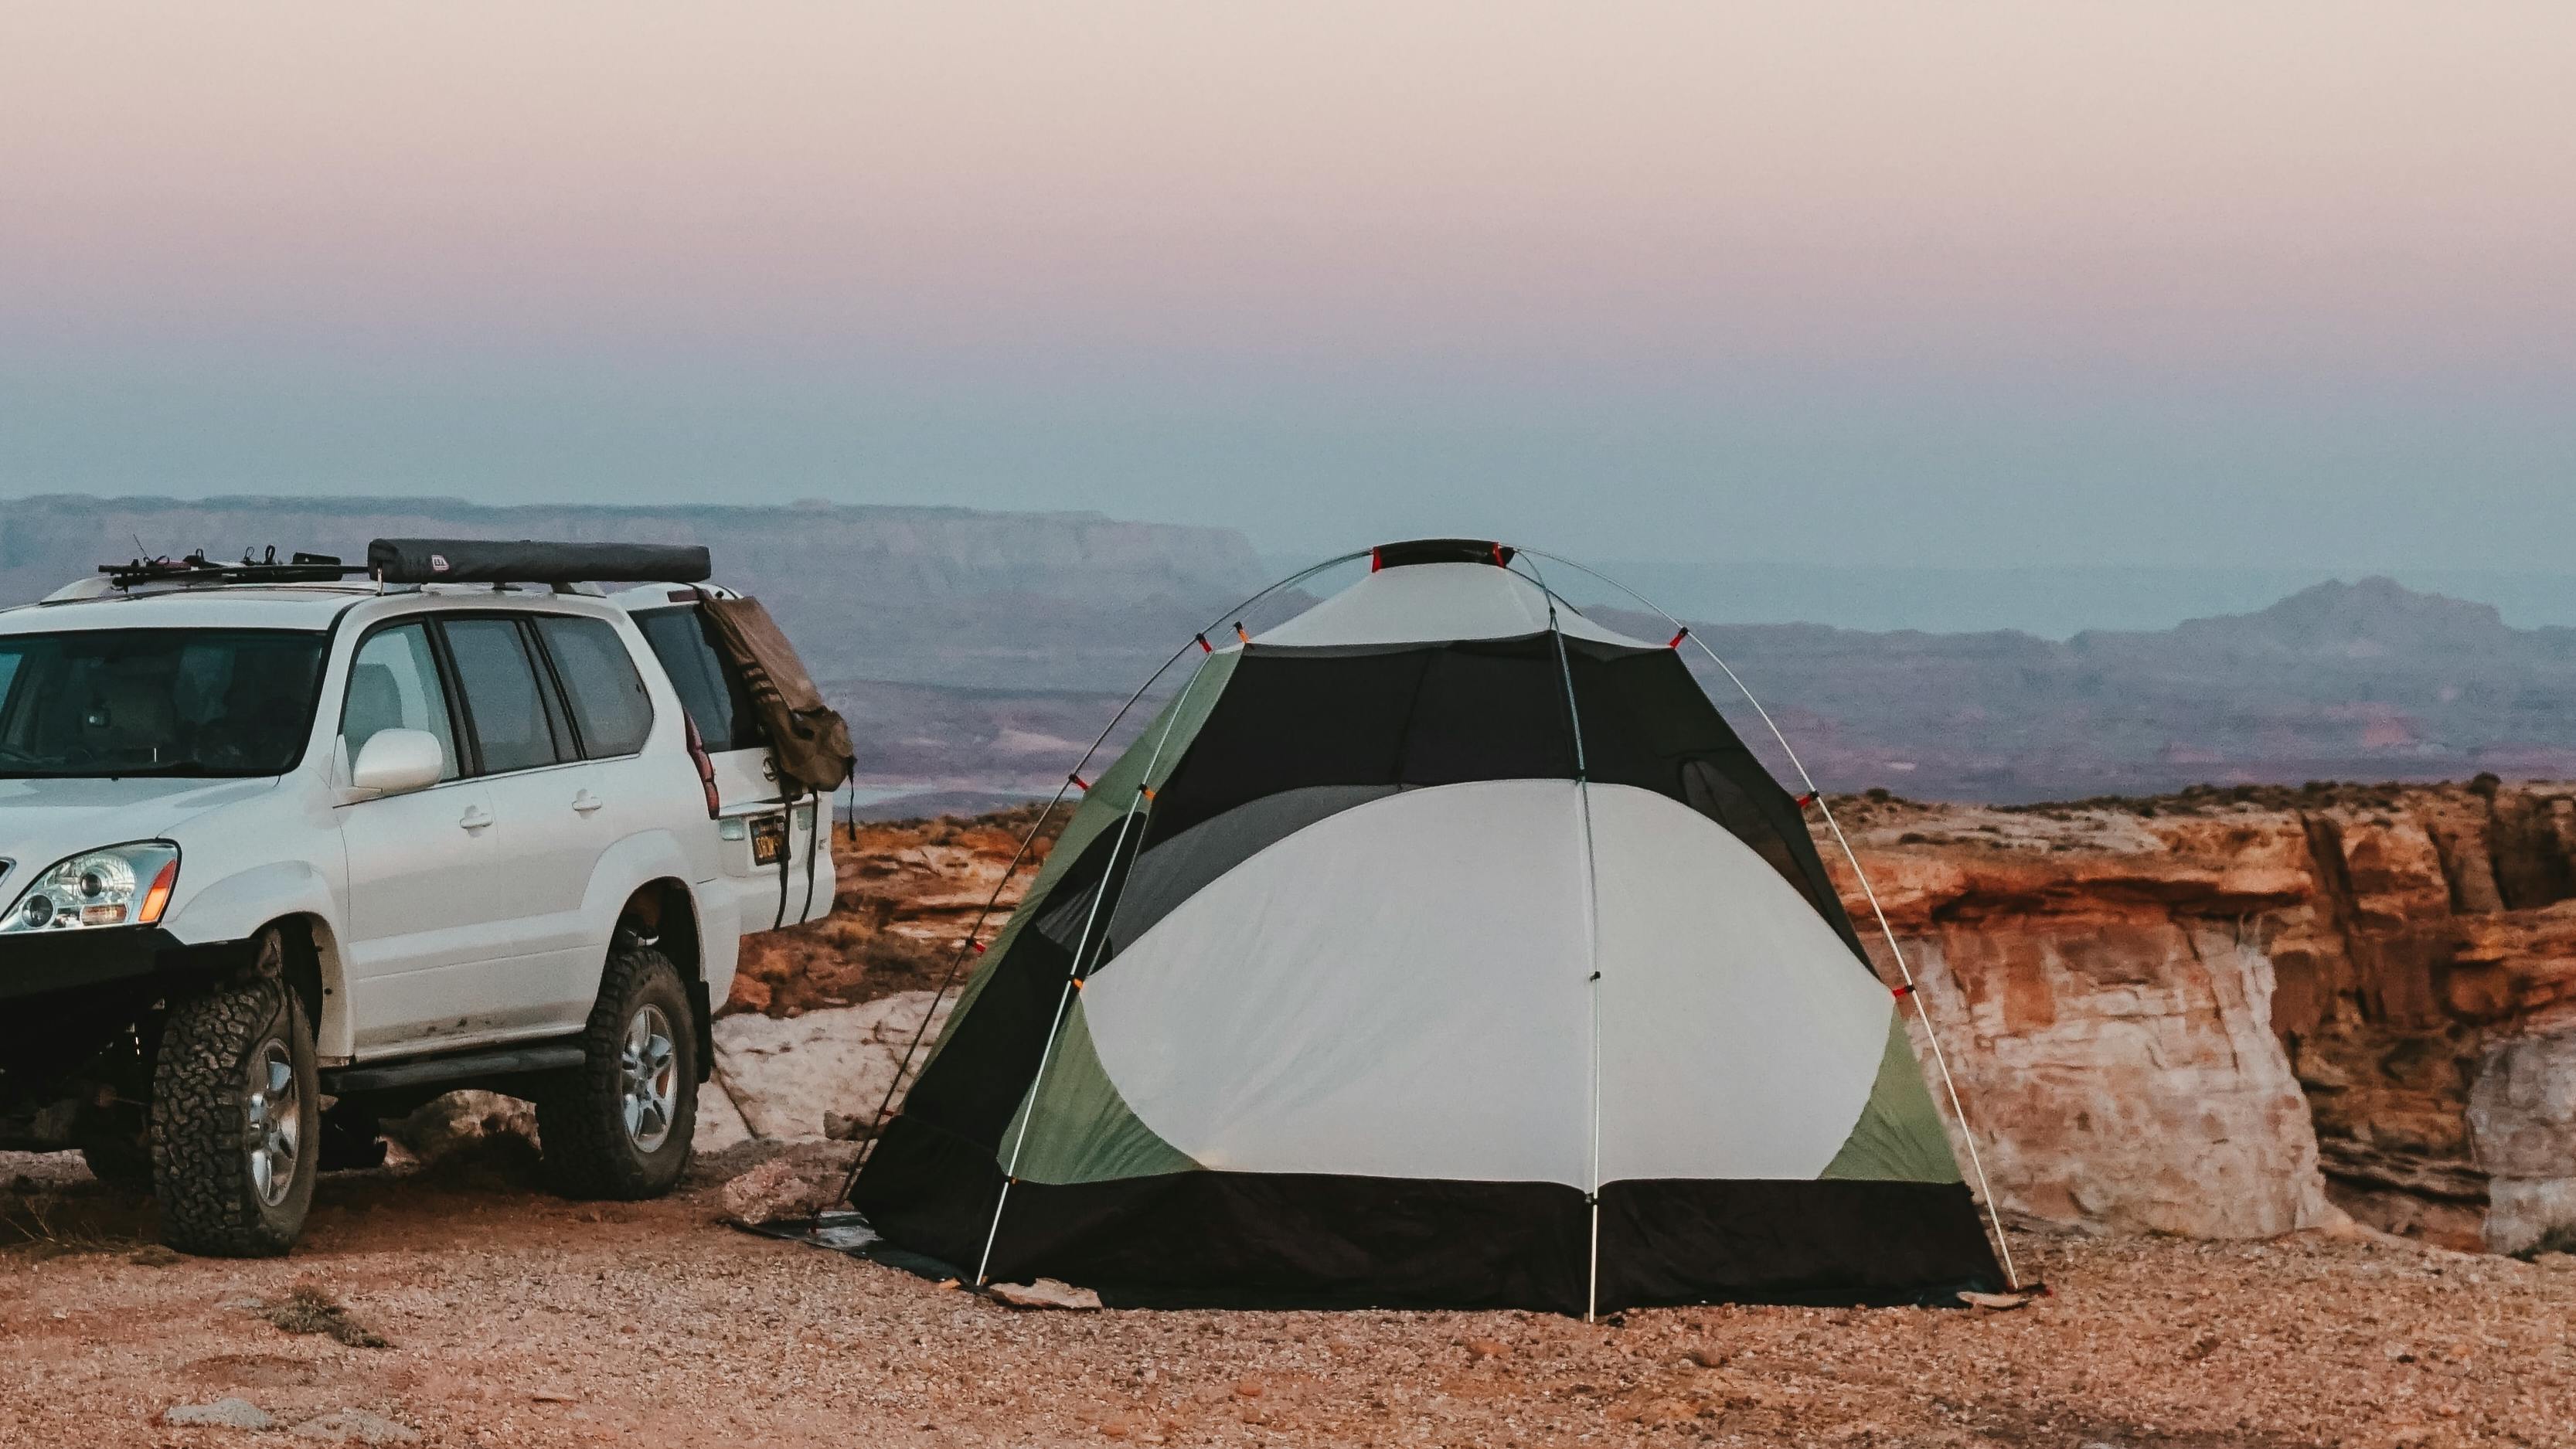 Tent next to a car. Canyons and mountains are in the background.